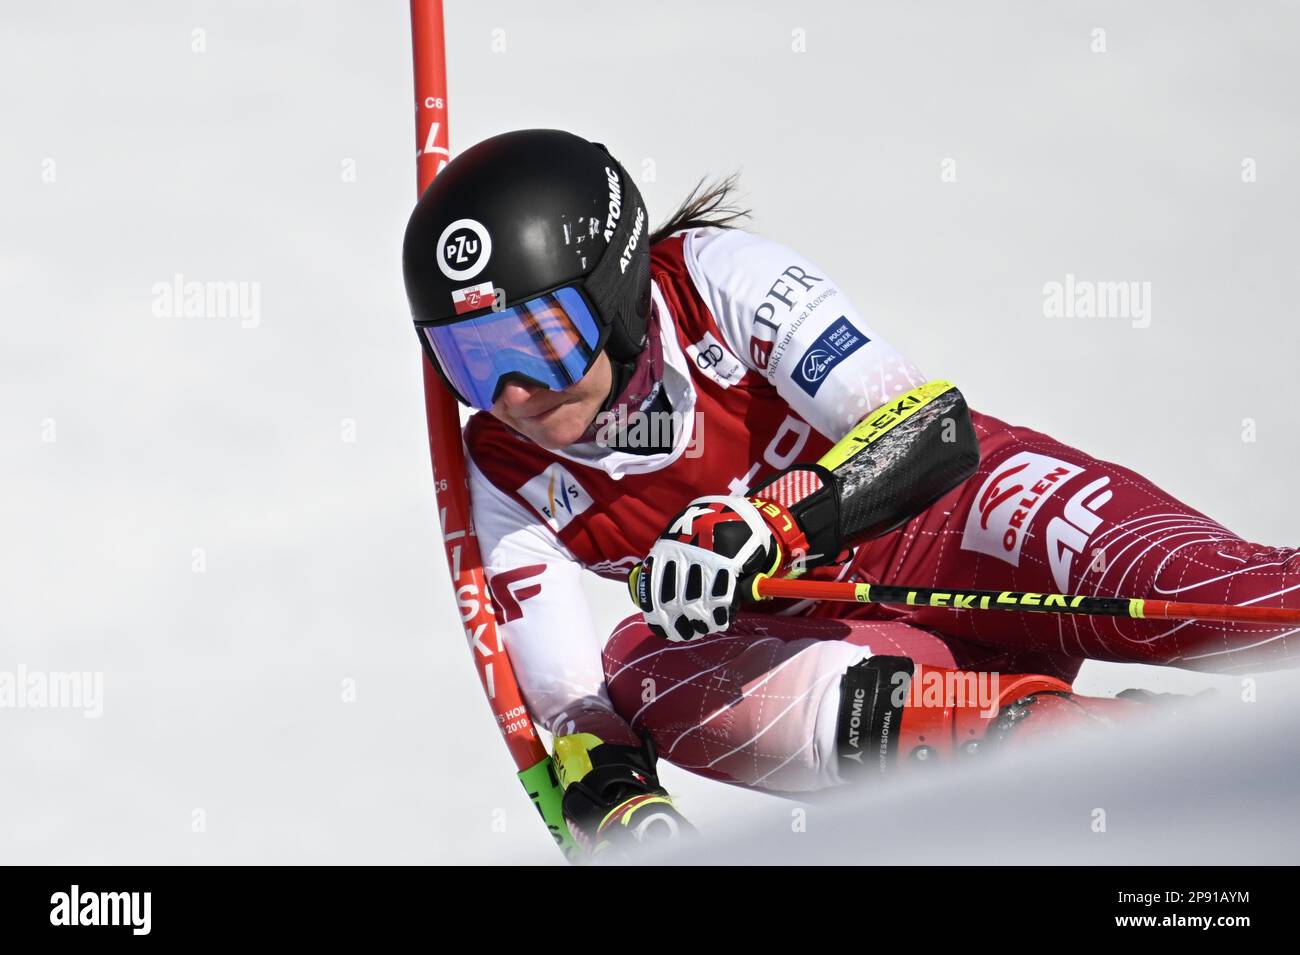 YEAR 20230310 Maryna Gasienica-Daniel, Poland, during the first run in the giant slalom competition in the World Cup, Åre.  Photo: Pontus Lundahl / TT / code 10050 Stock Photo